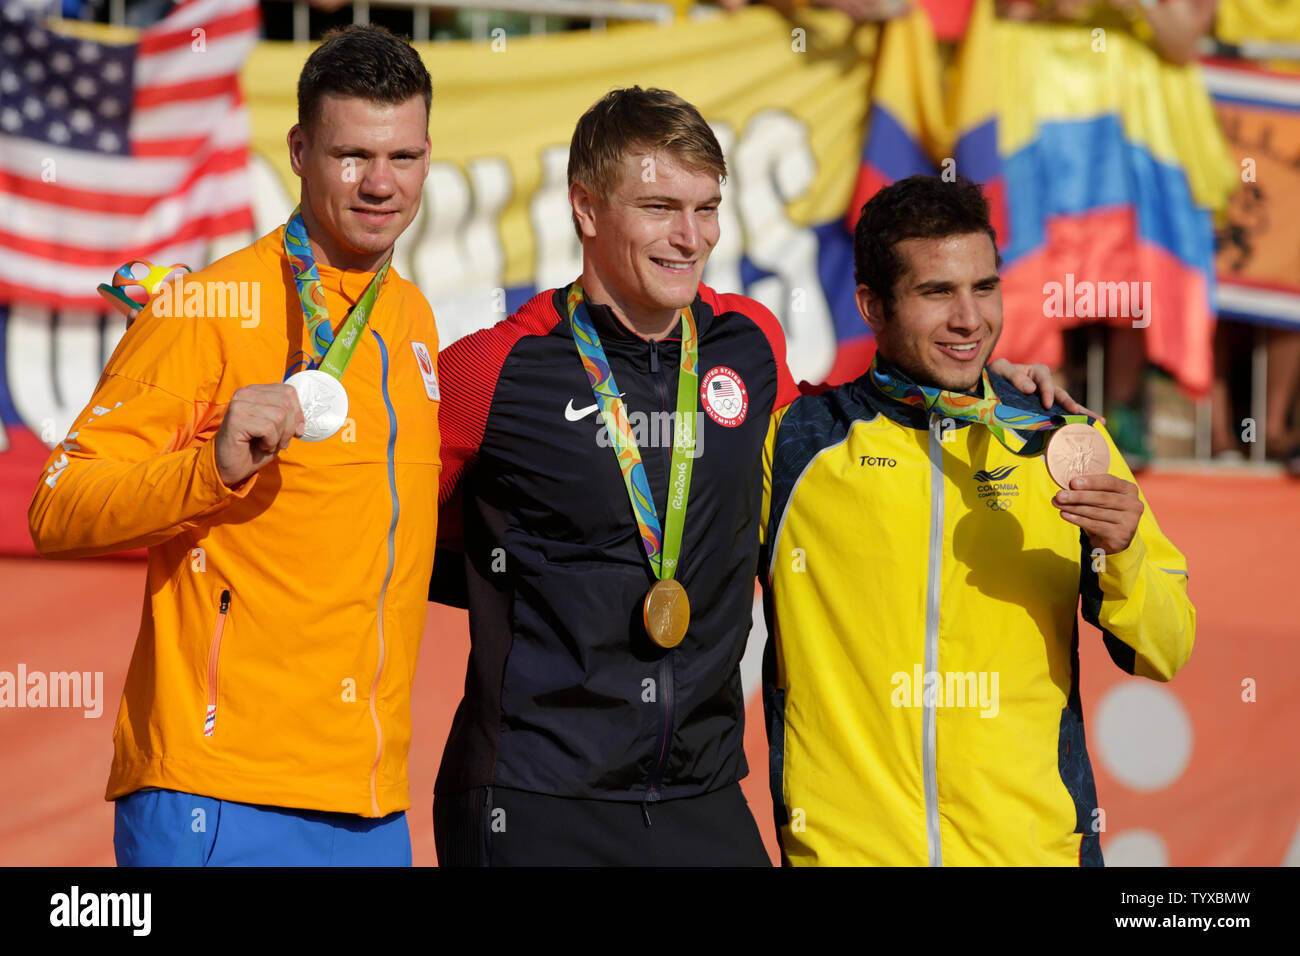 Medalists in Men's Cycling (L-R) Netherland's Jelle von with silver, Connor Fields with gold and Columbia's Carlos Alberto Ramirez Yepes with bronze pose for a photo in the Olympic